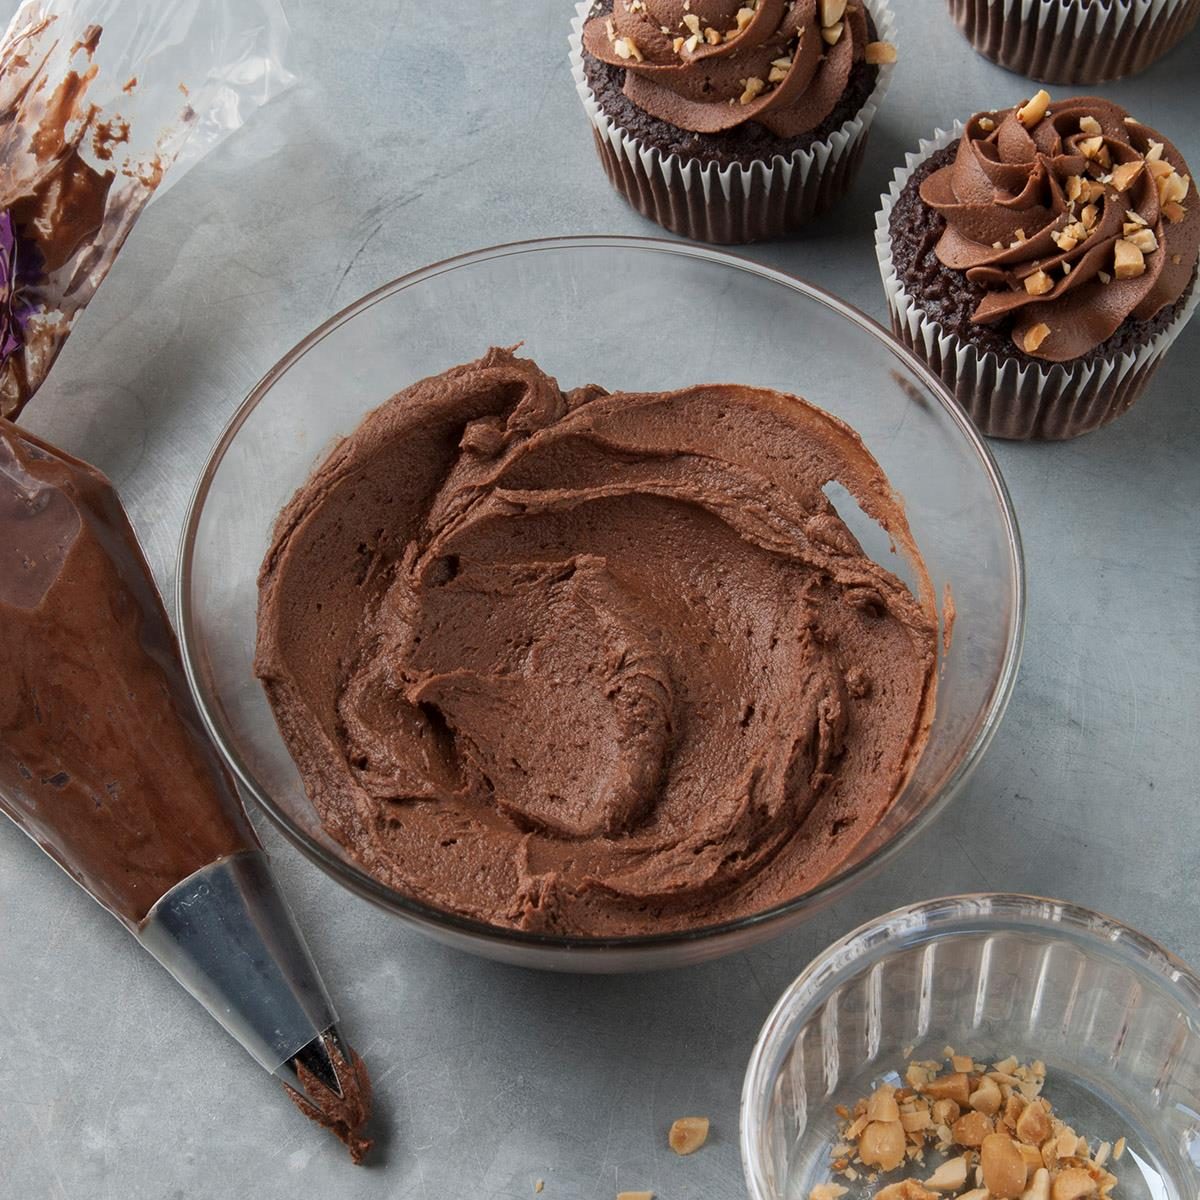 Chocolate Peanut Butter Frosting Recipe: How to Make It